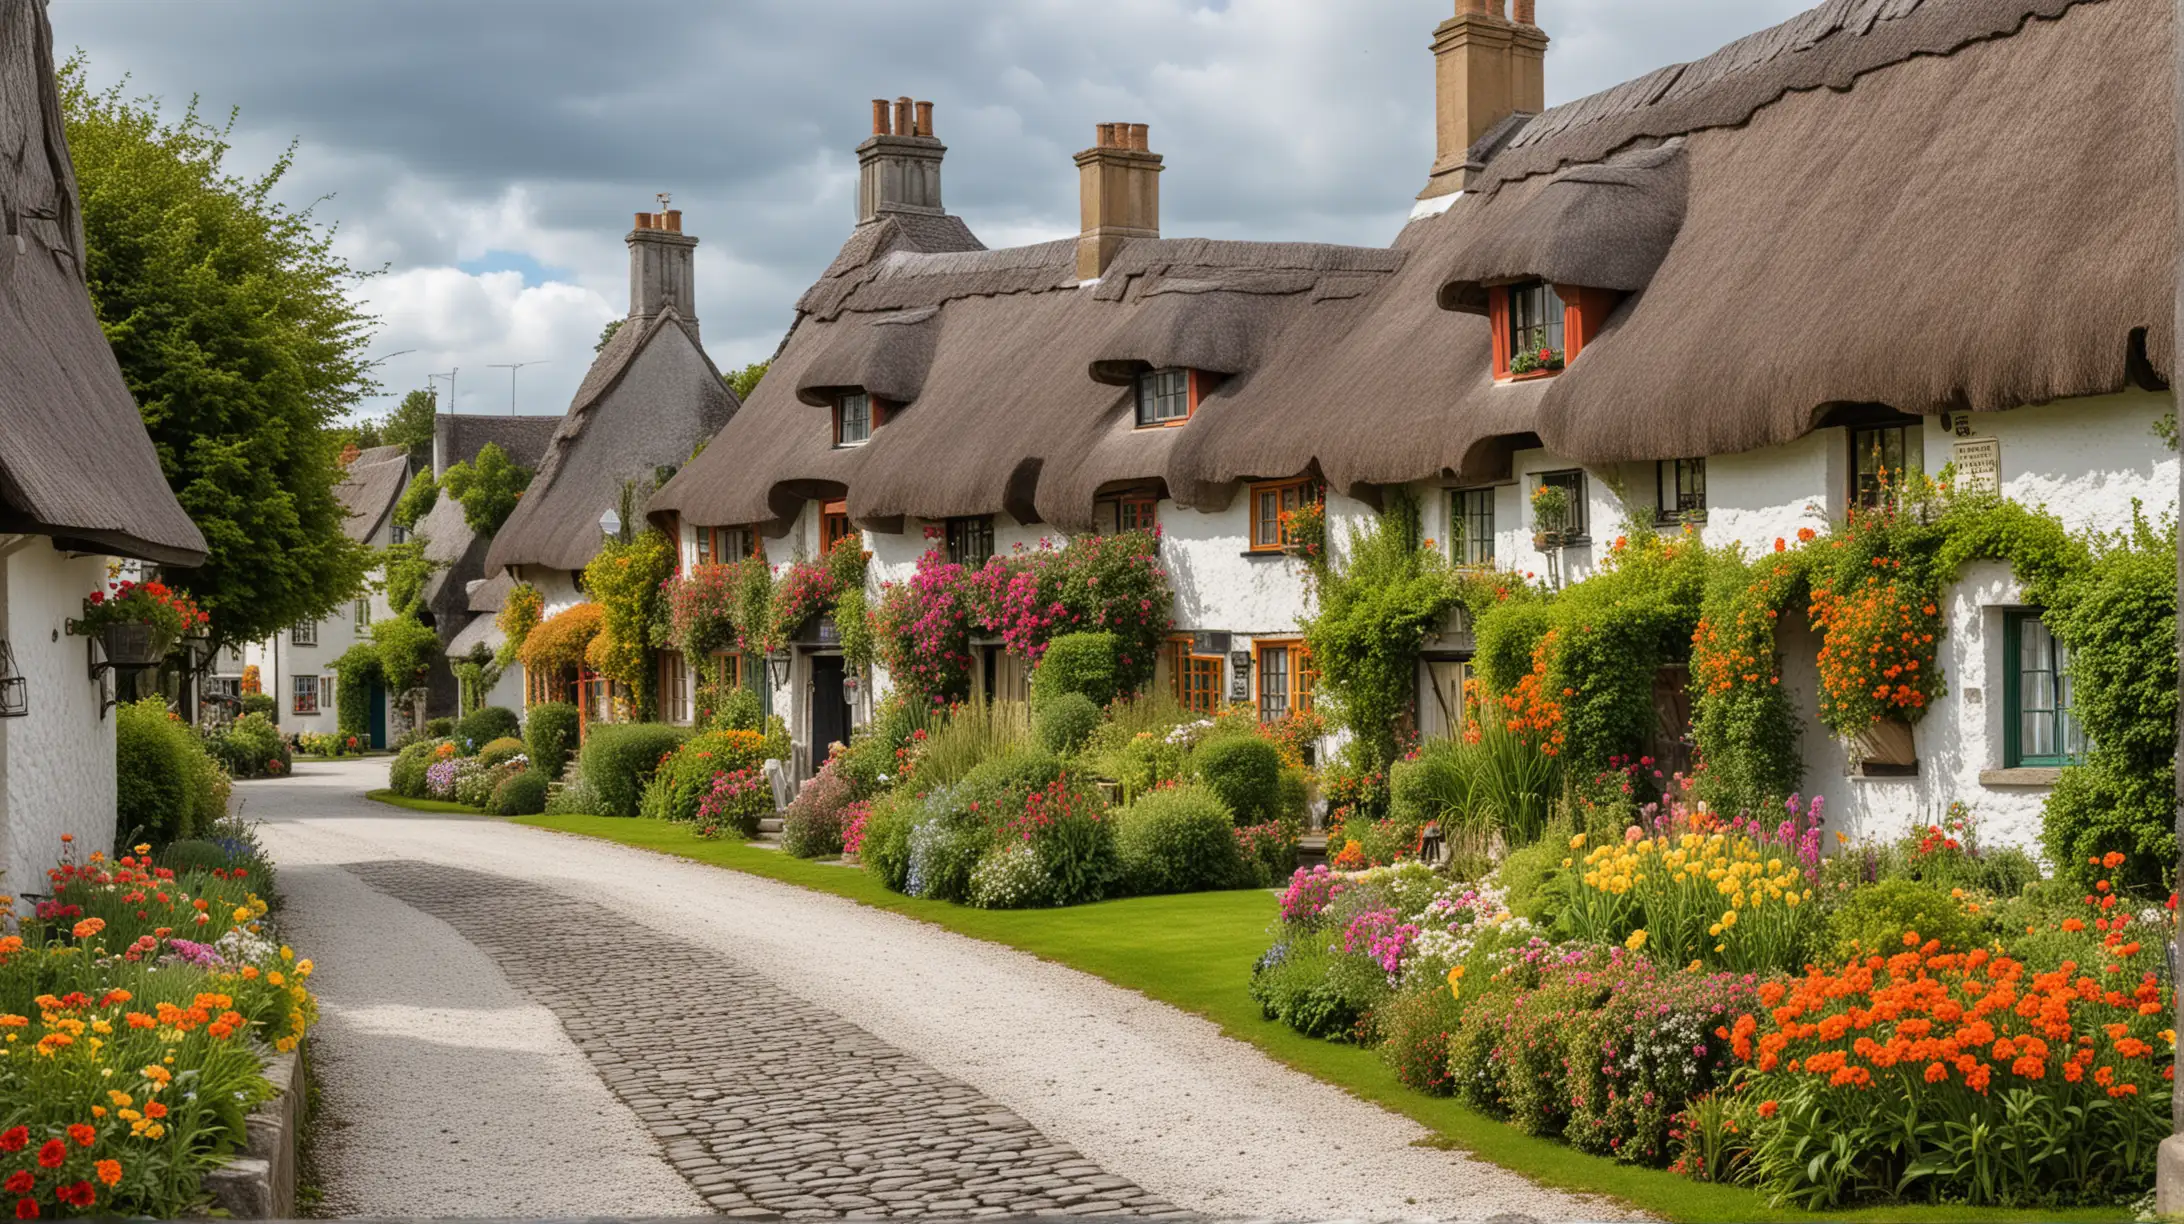 he picturesque village of Adare, with its thatched cottages and colorful garden